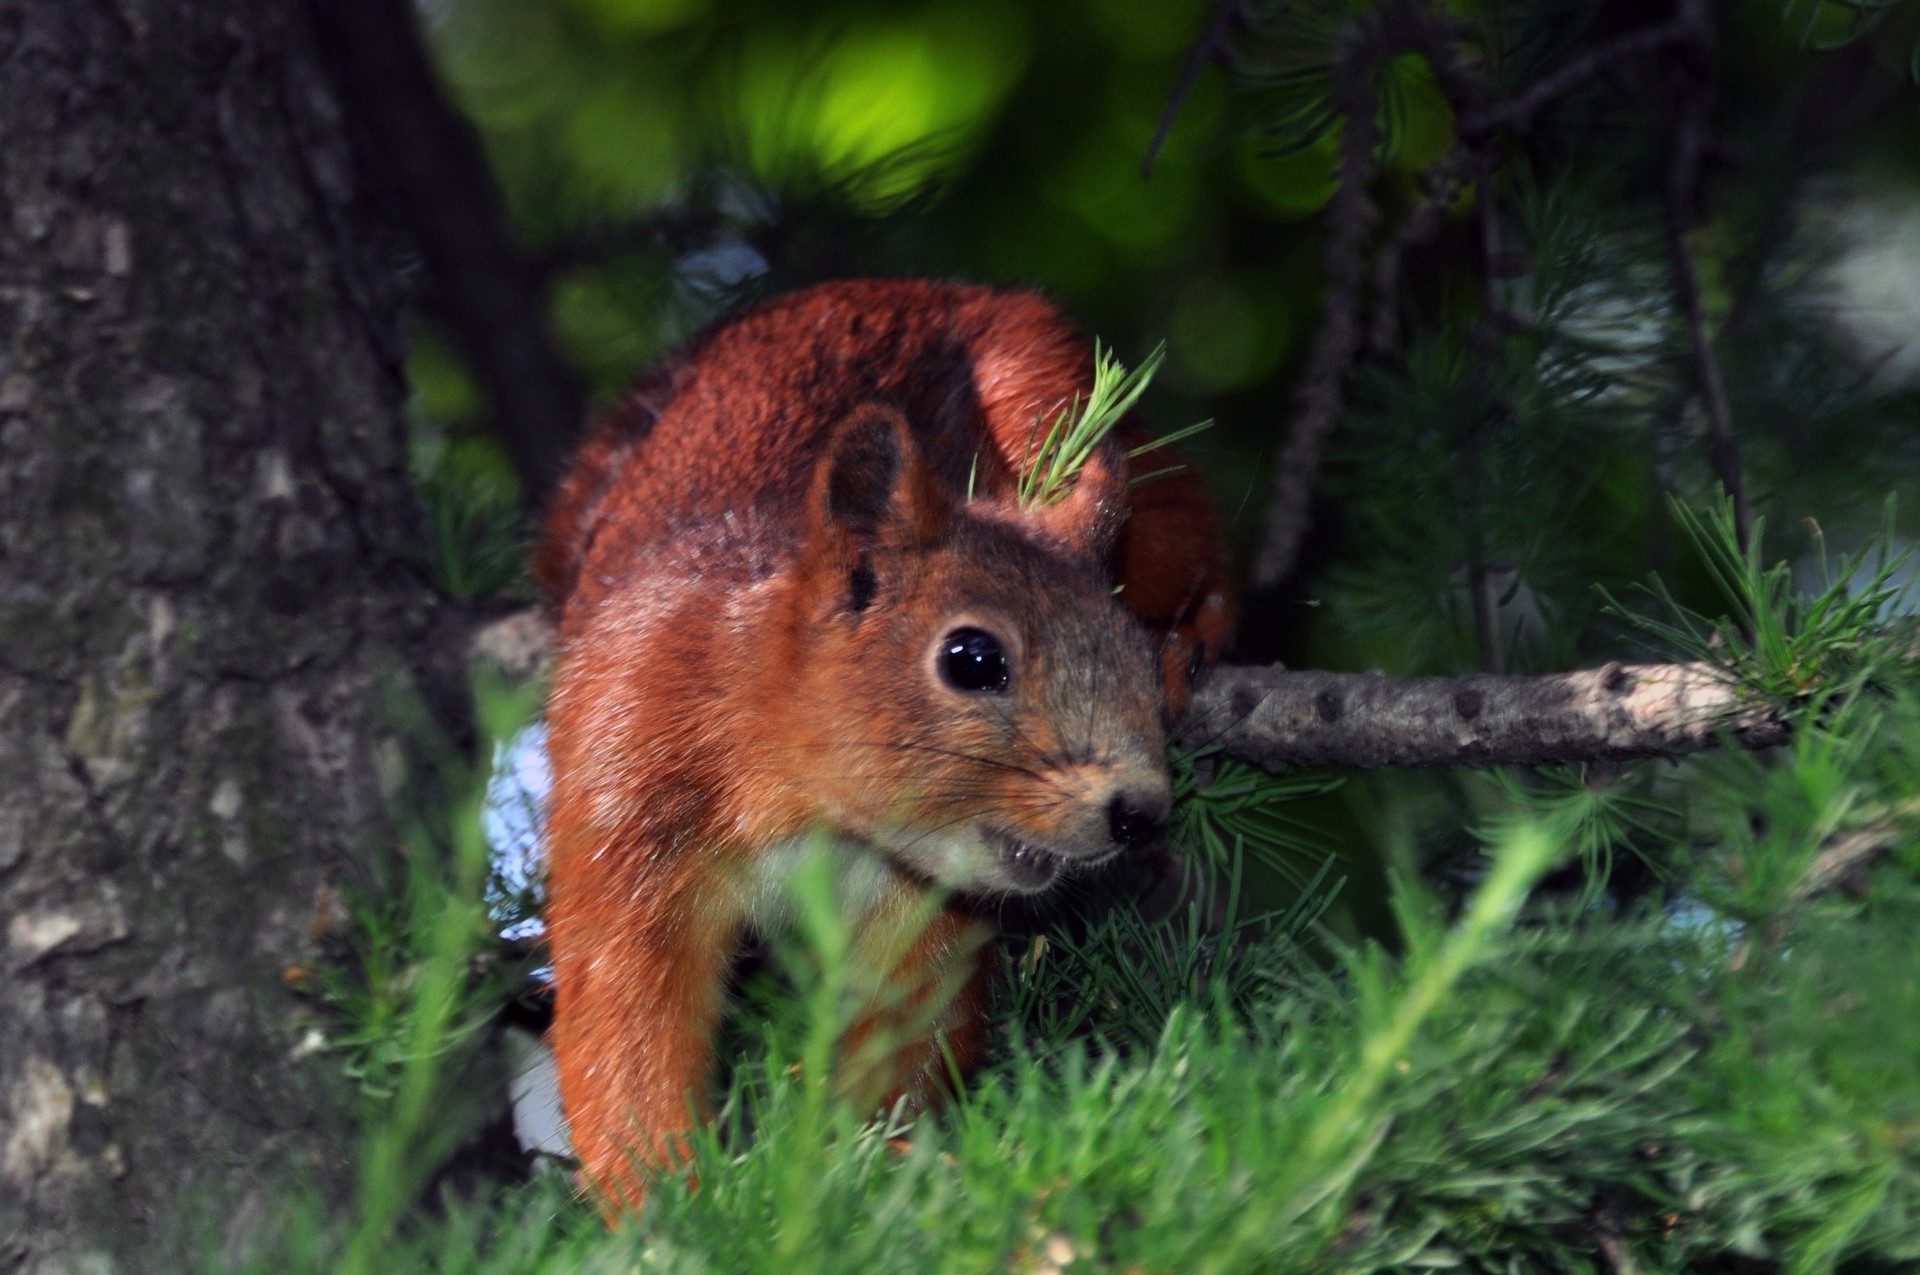 proteins mammal wildlife nature tree wood wild outdoors animal fur cute rodent squirrel little